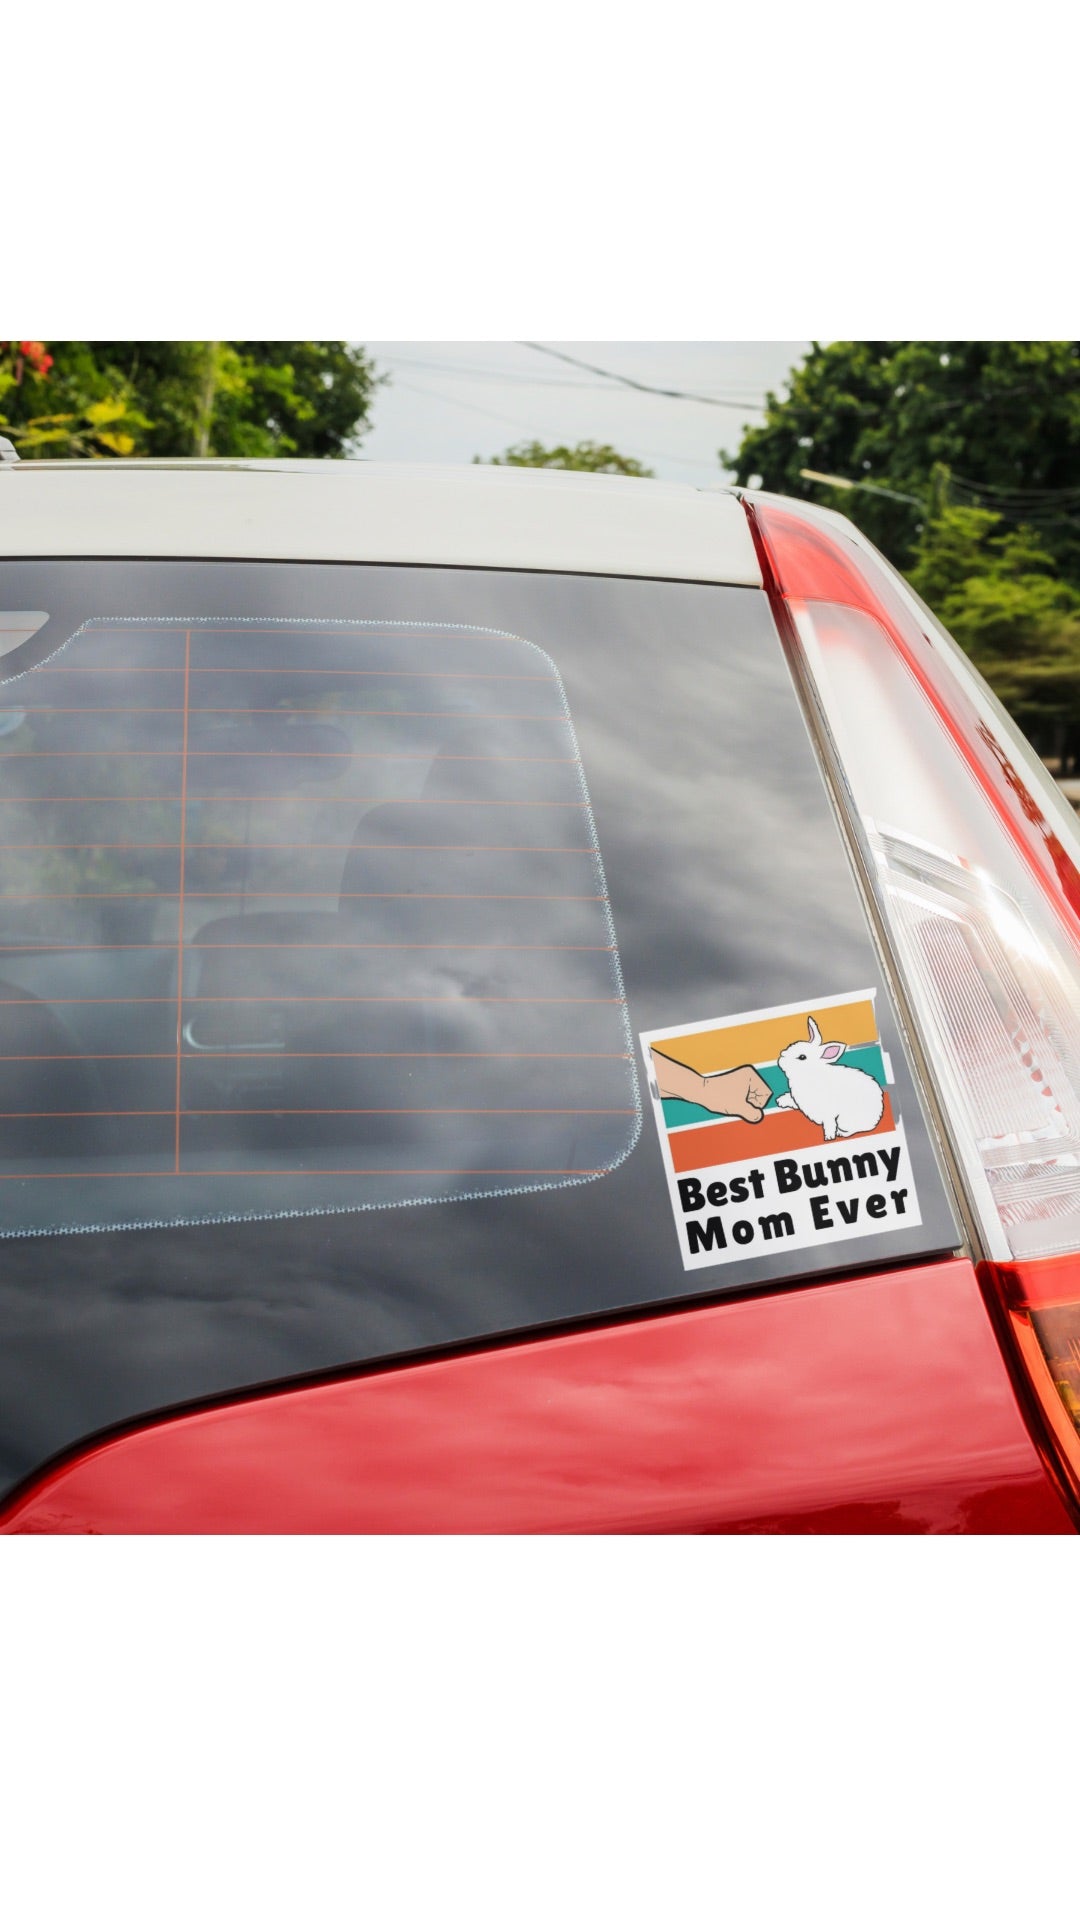 window sticker with a bunny fist bumping and the text "best bunny mom ever"